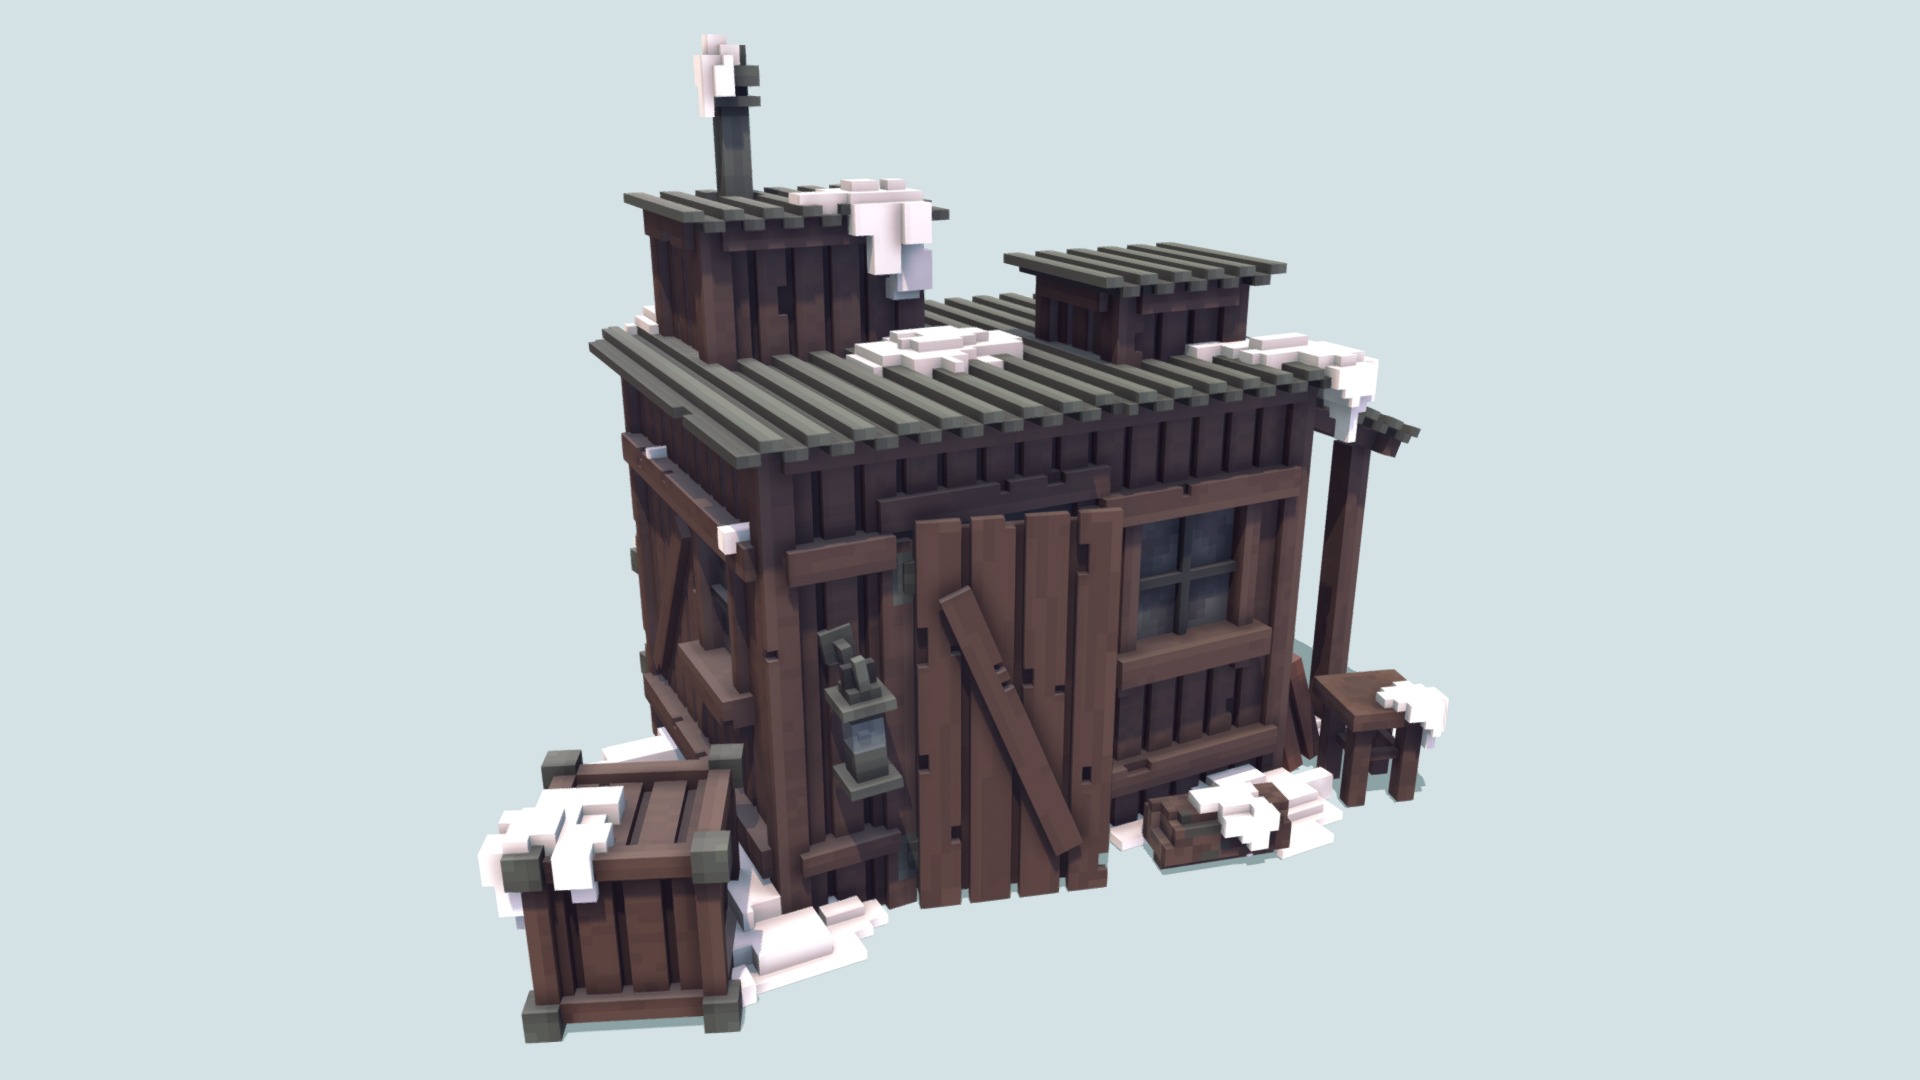 Ice Fishing - Day 12 of the #3December challenge on Sketchfab.


A little Ice Fishing hut 3d model